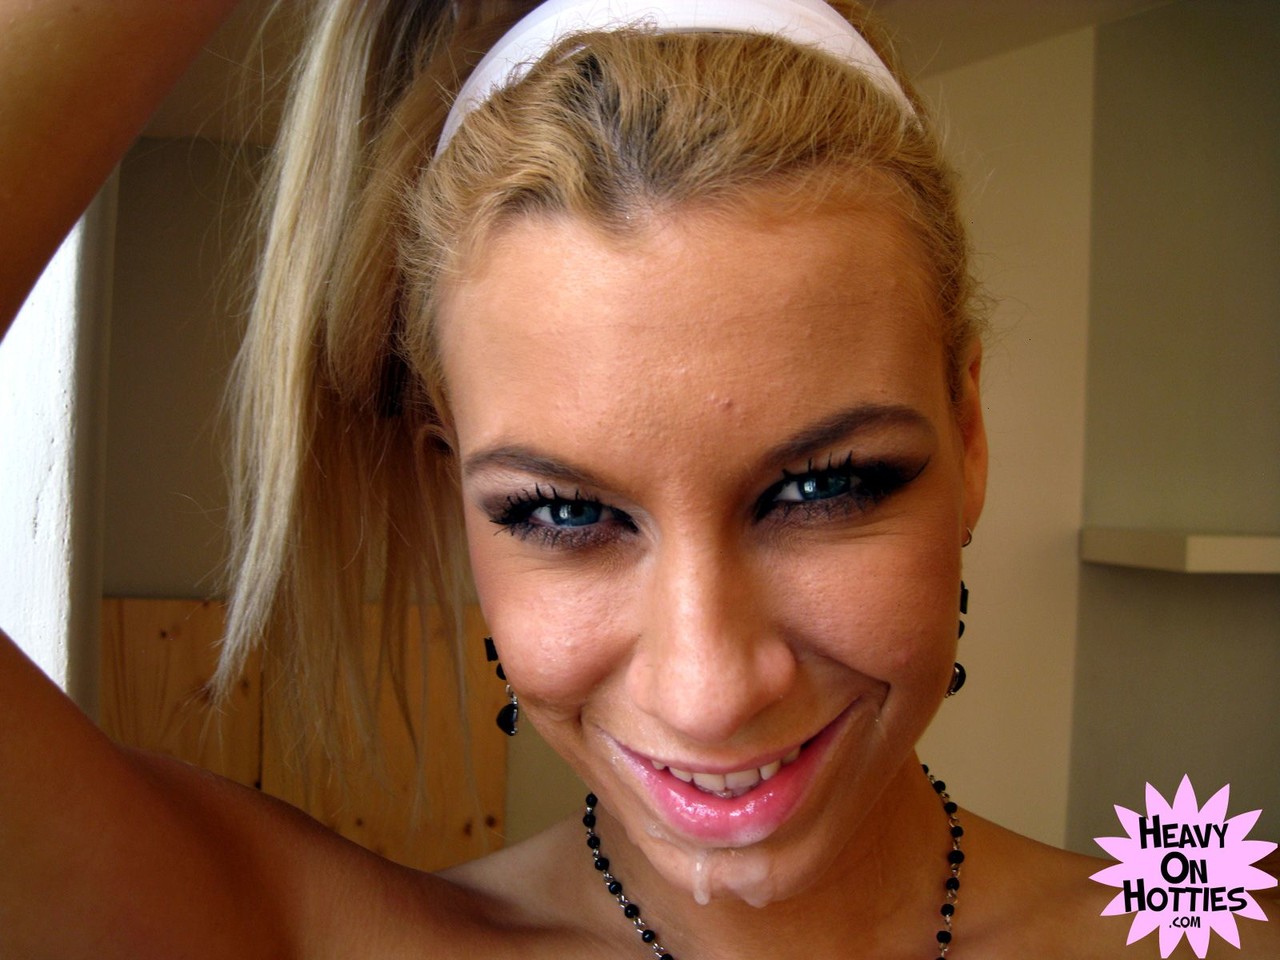 Blonde Angelina Love poses with jizz on her face after giving a BJ in POV ポルノ写真 #427391667 | Heavy On Hotties Pics, Angelina Love, POV, モバイルポルノ